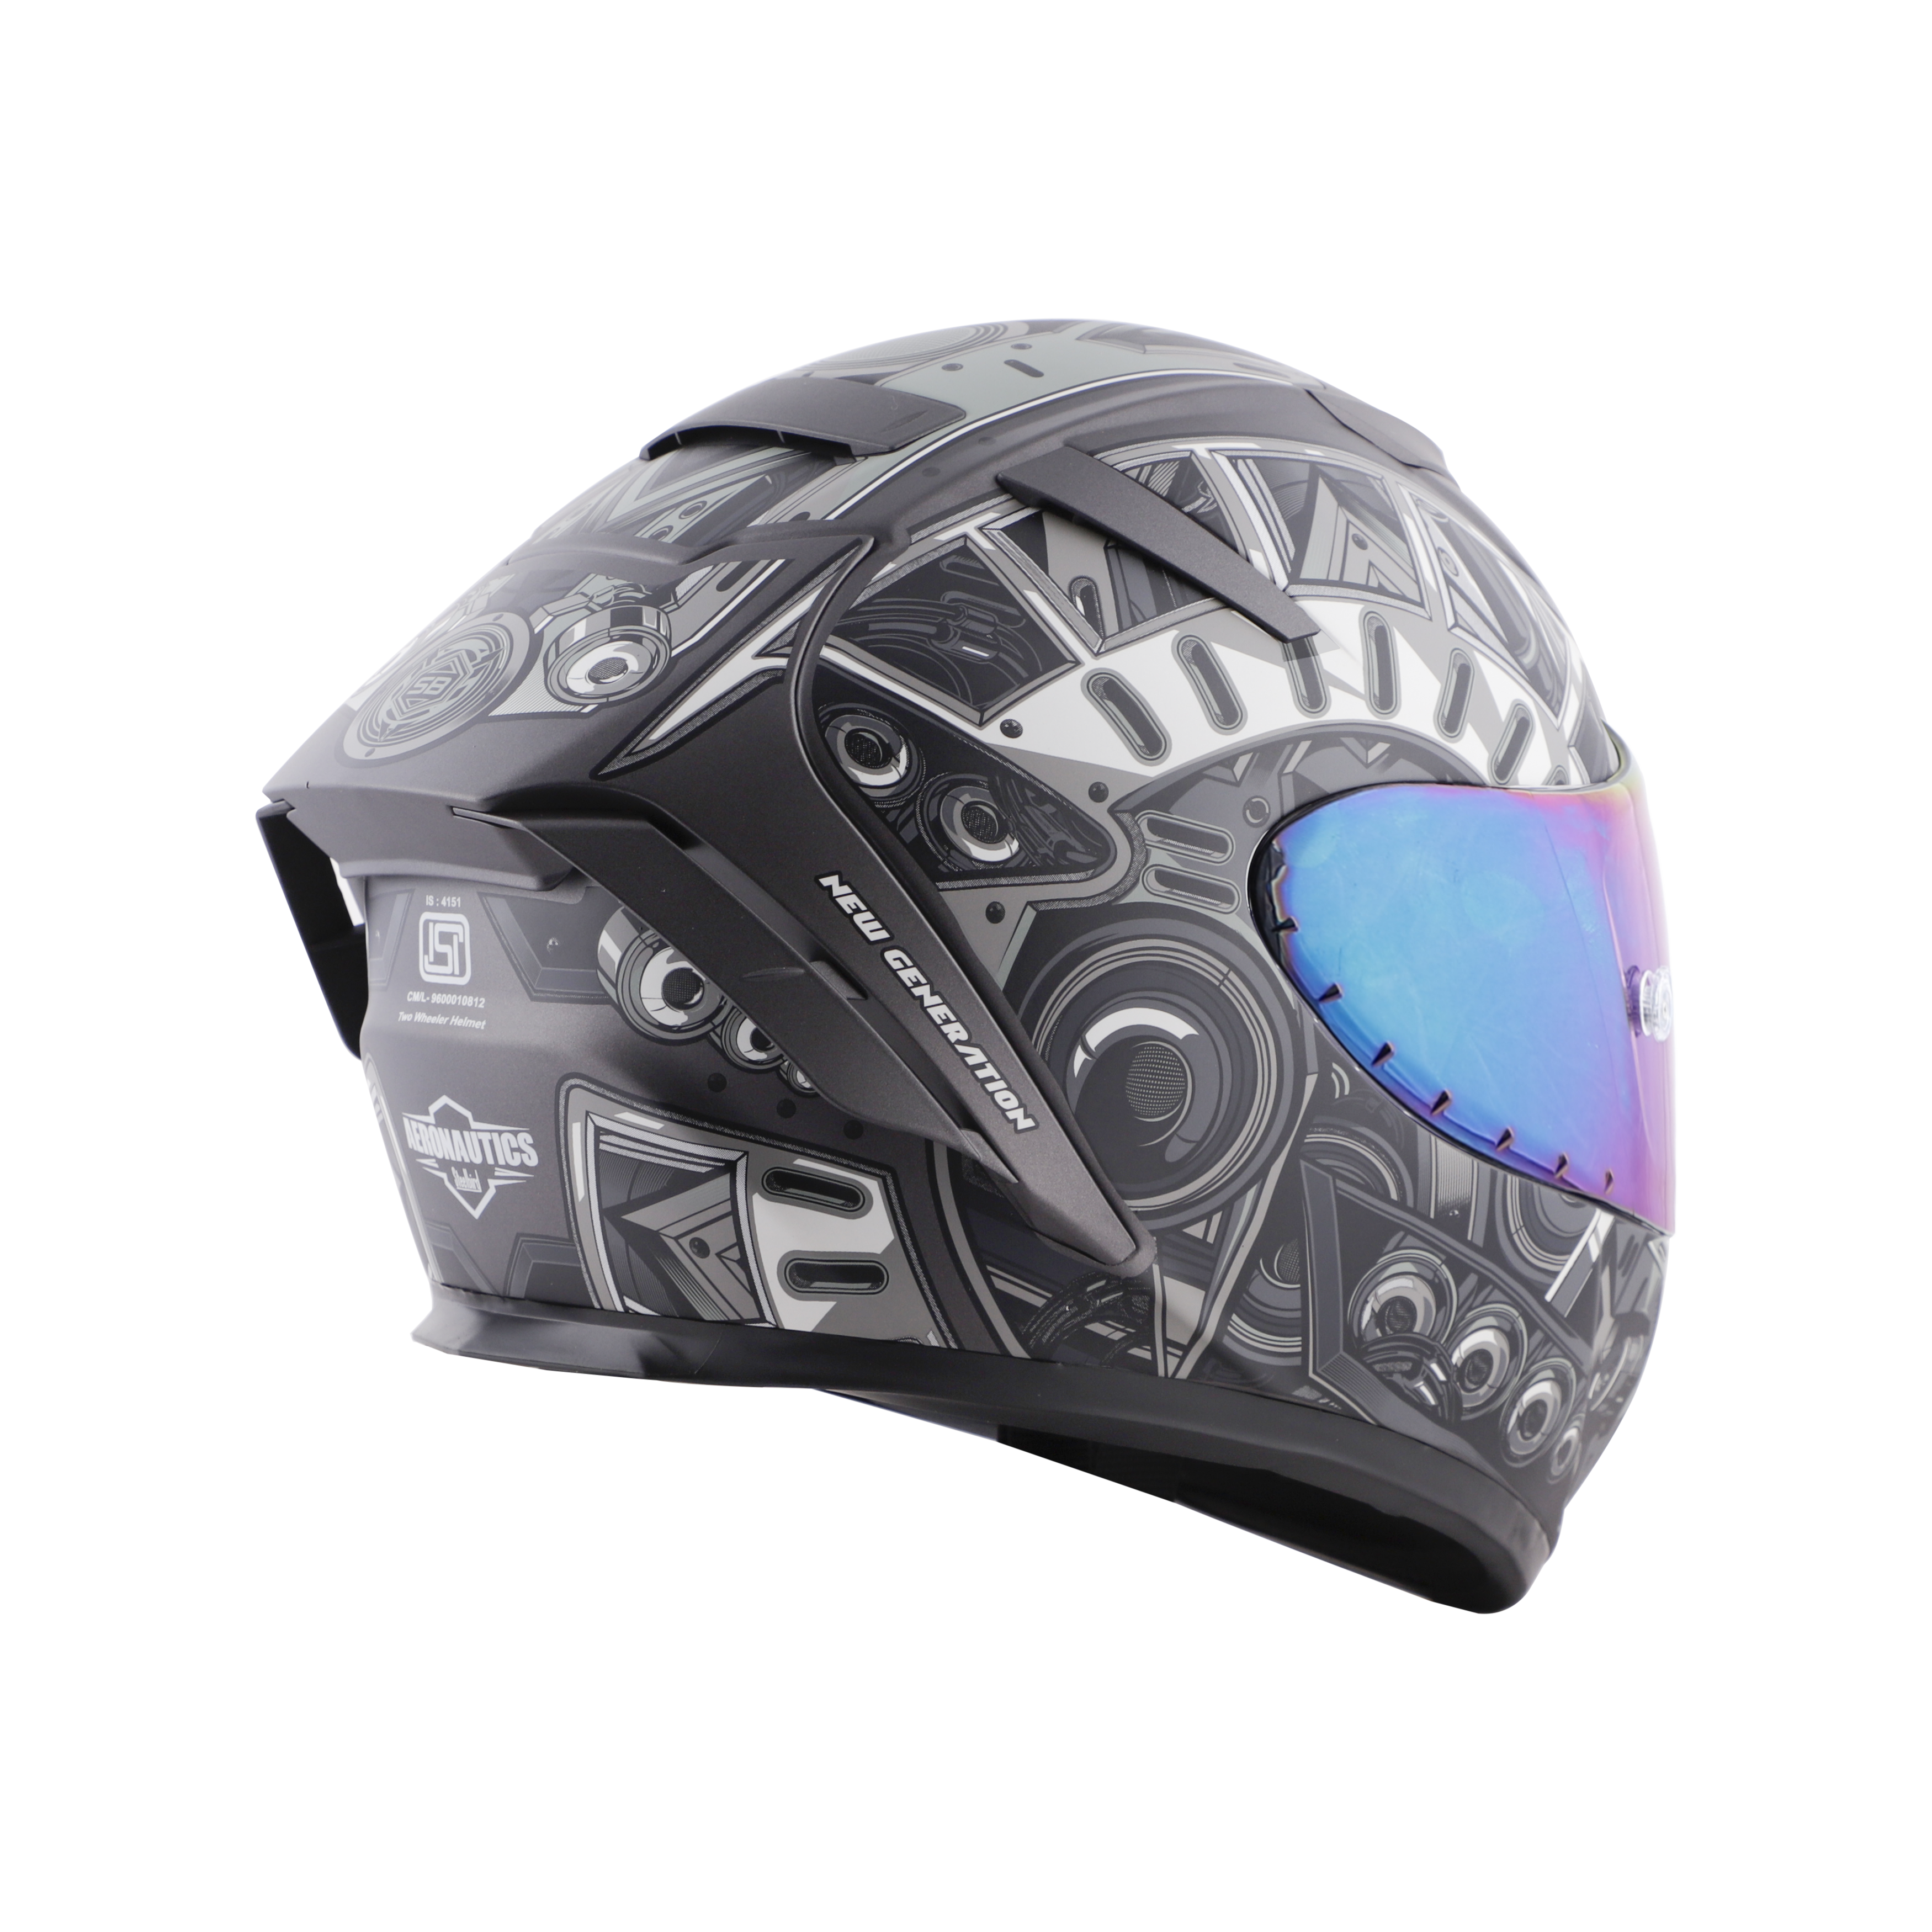 SA-2 TERMINATOR 2.0 GLOSSY H.GREY WITH GREY FITTED WITH CLEAR VISOR EXTRA RAINBOW CHROME VISOR FREE (WITH ANTI-FOG SHIELD HOLDER)